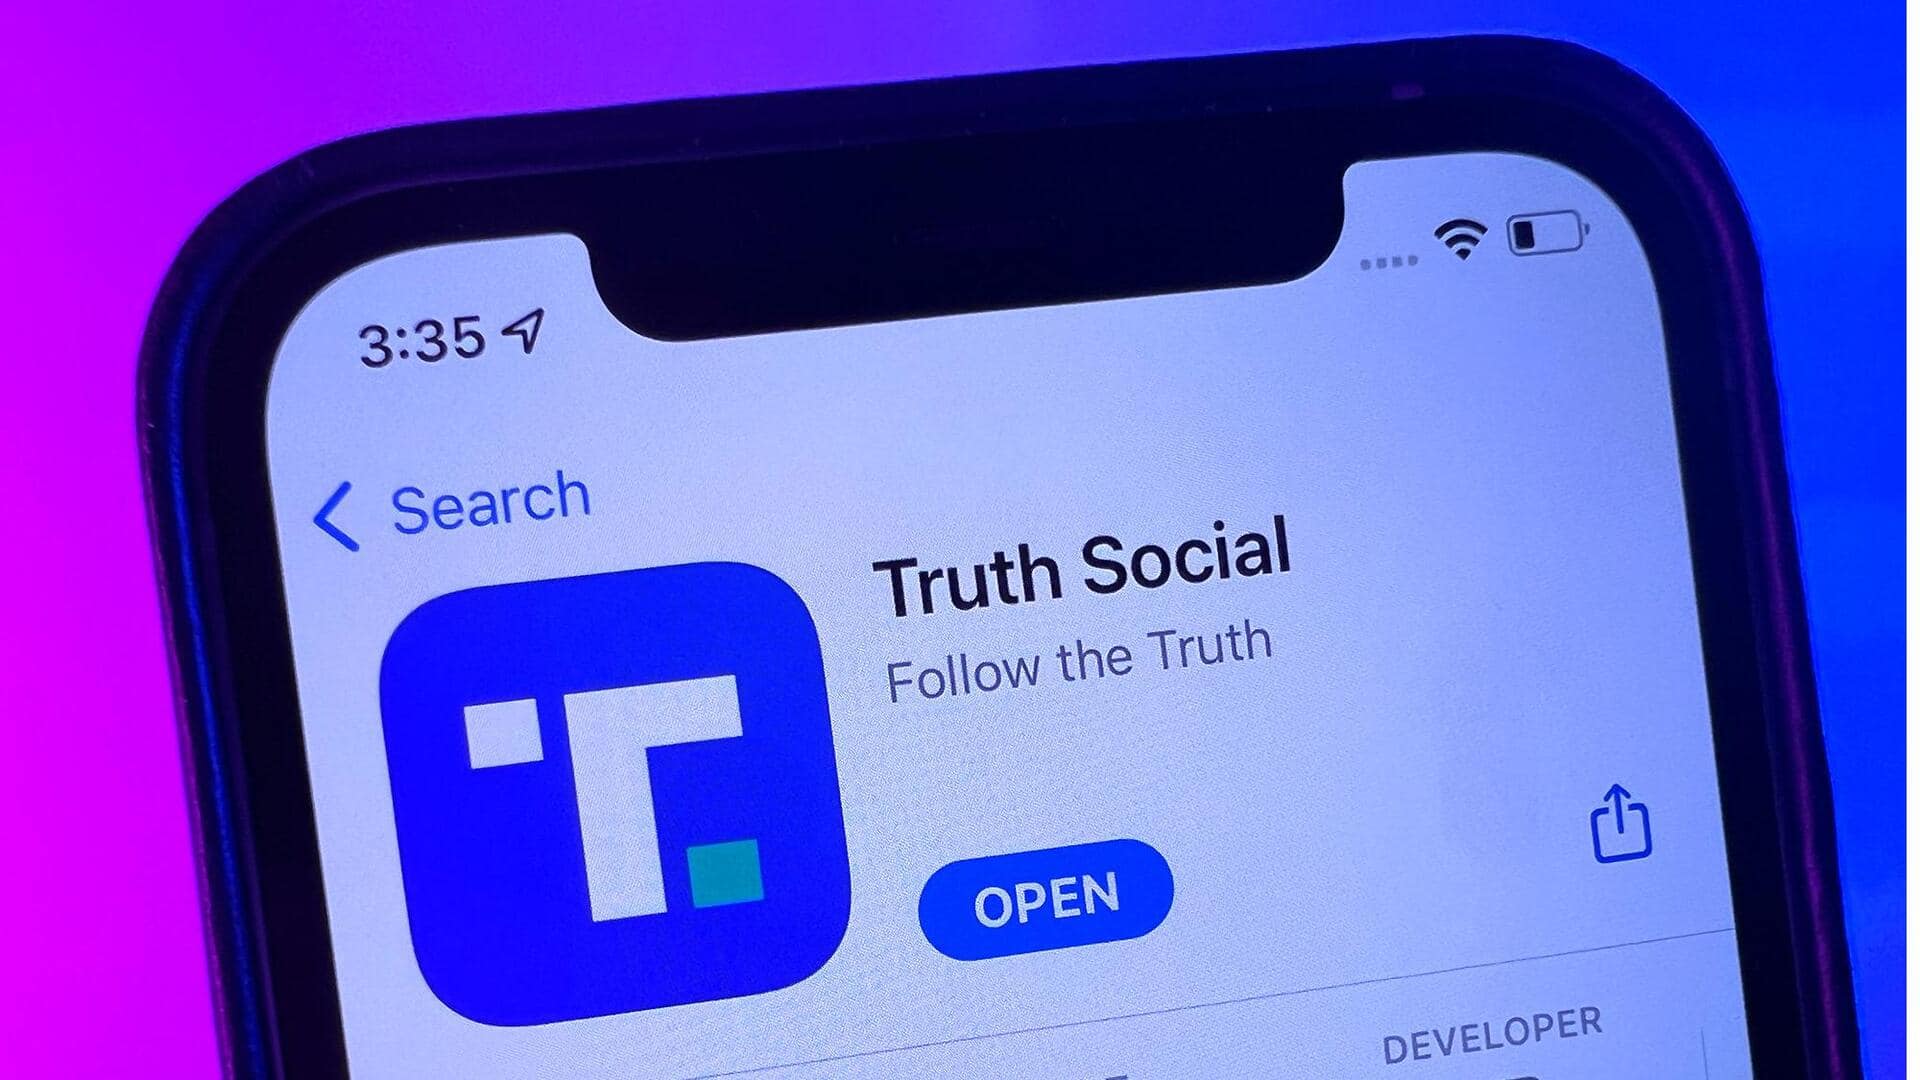 Trump Media sues co-founders of Truth Social: Here's why